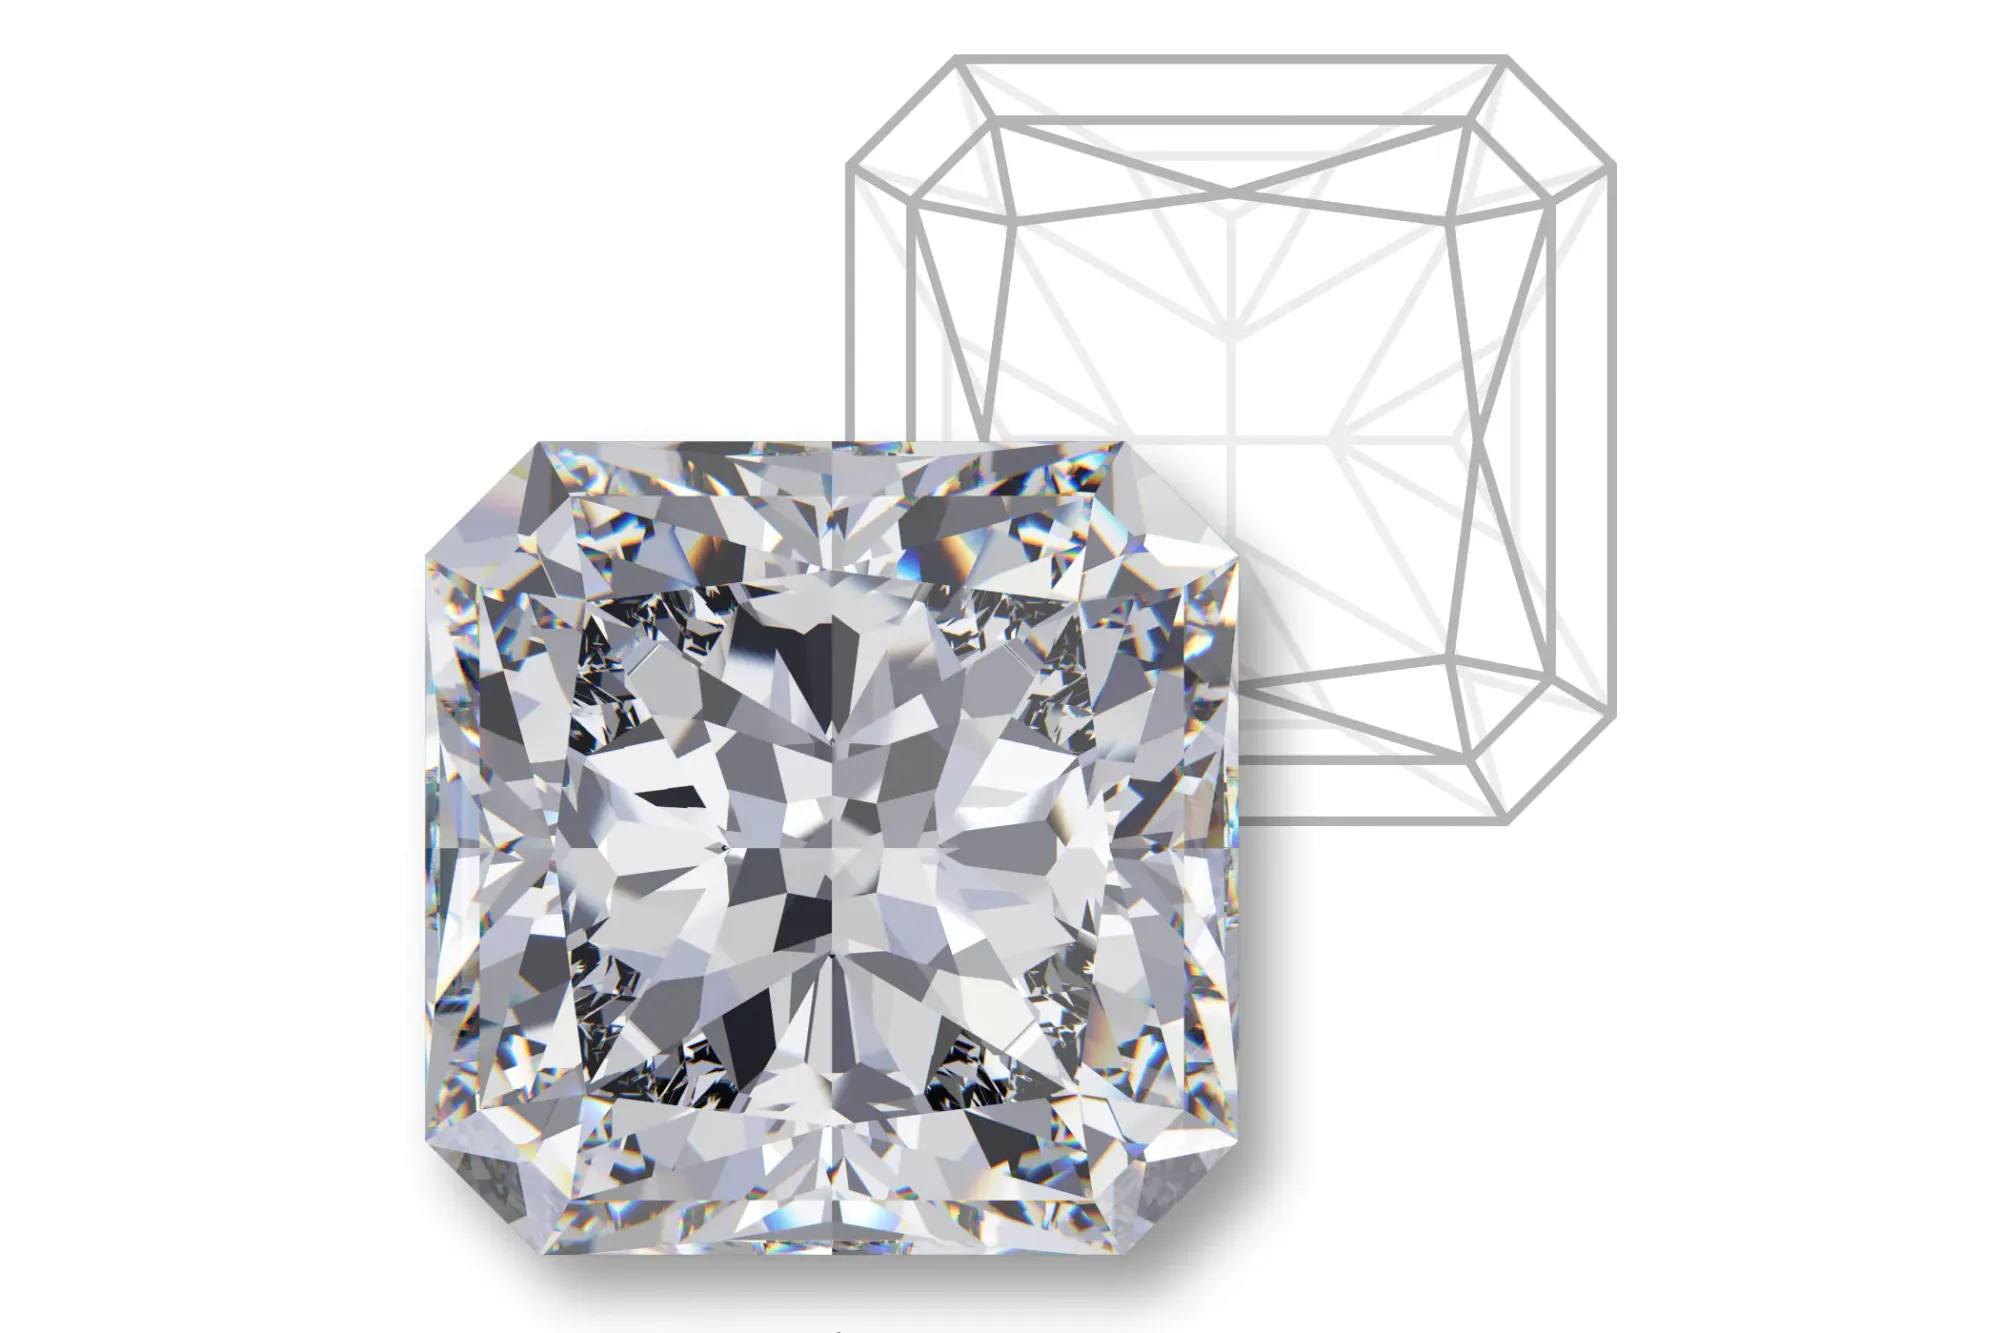 Rendering of a radiant cut diamond next to a drawing of the facet arrangement in the diamond.